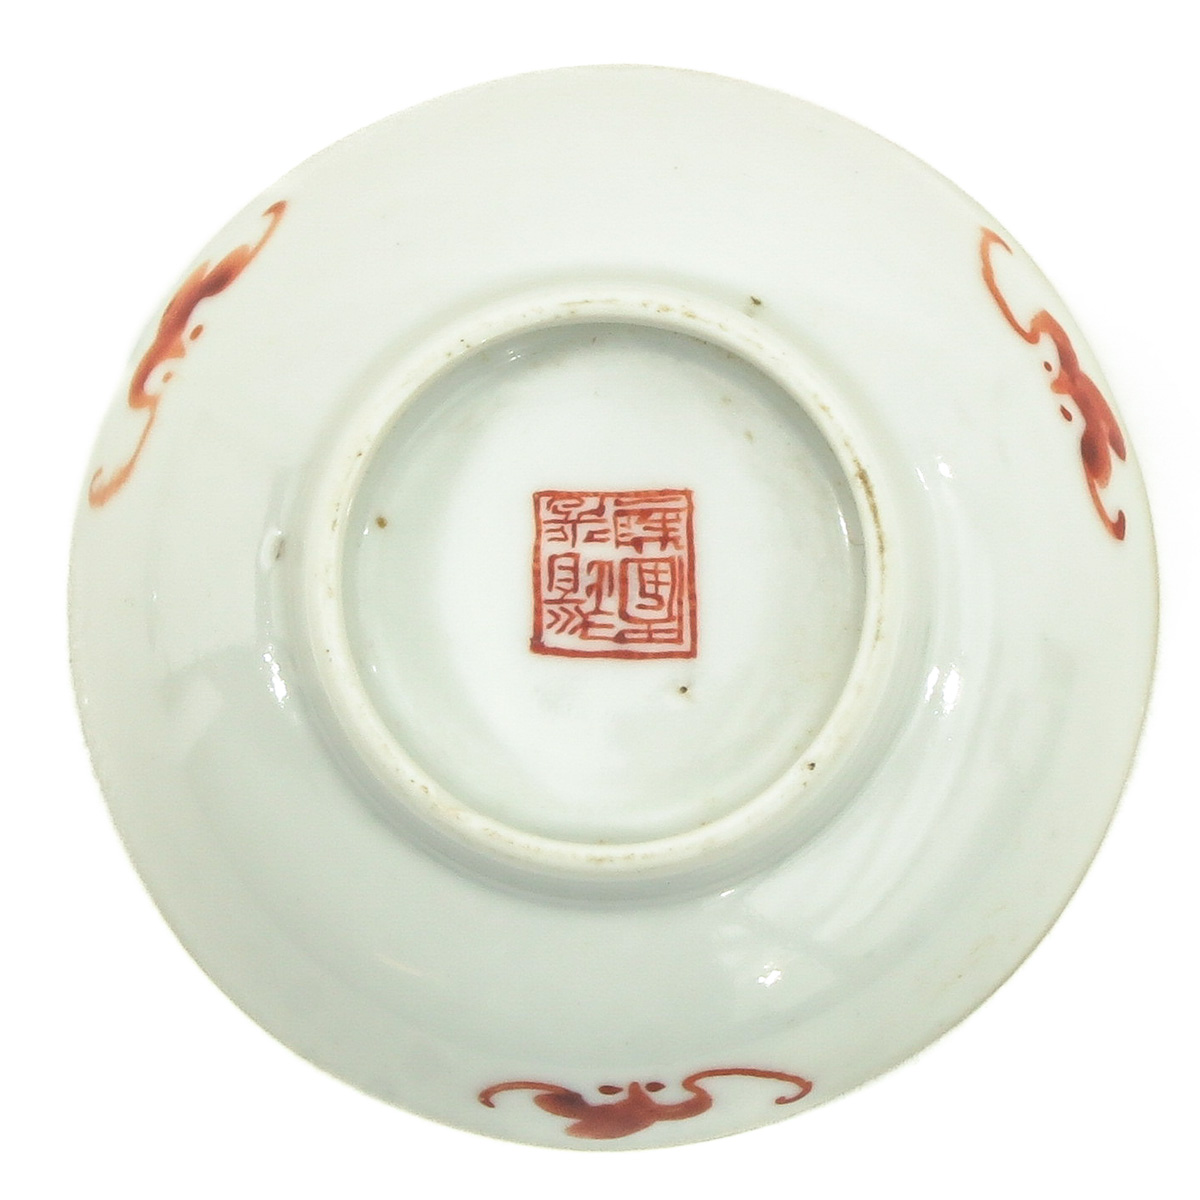 A Series of 5 Small Dragon Dishes - Image 8 of 10